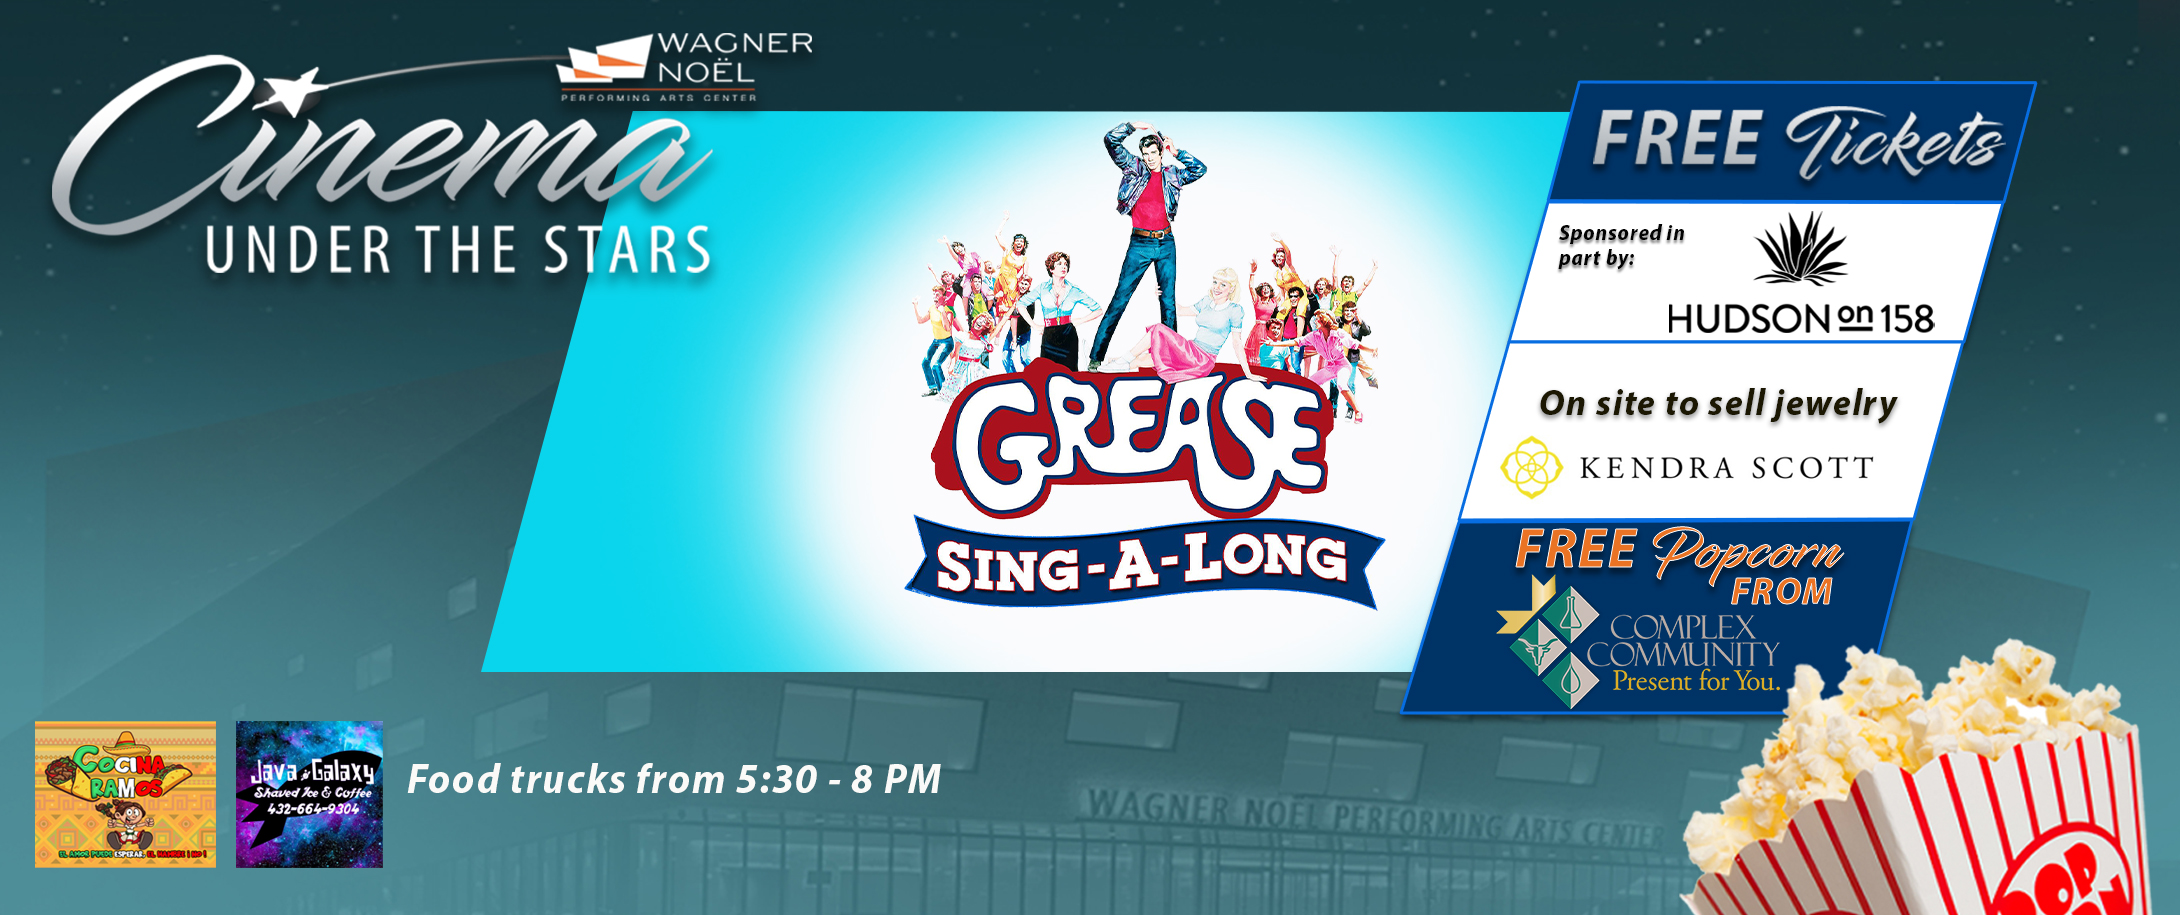 Cinema Under the Stars - Grease Sing-A-Long